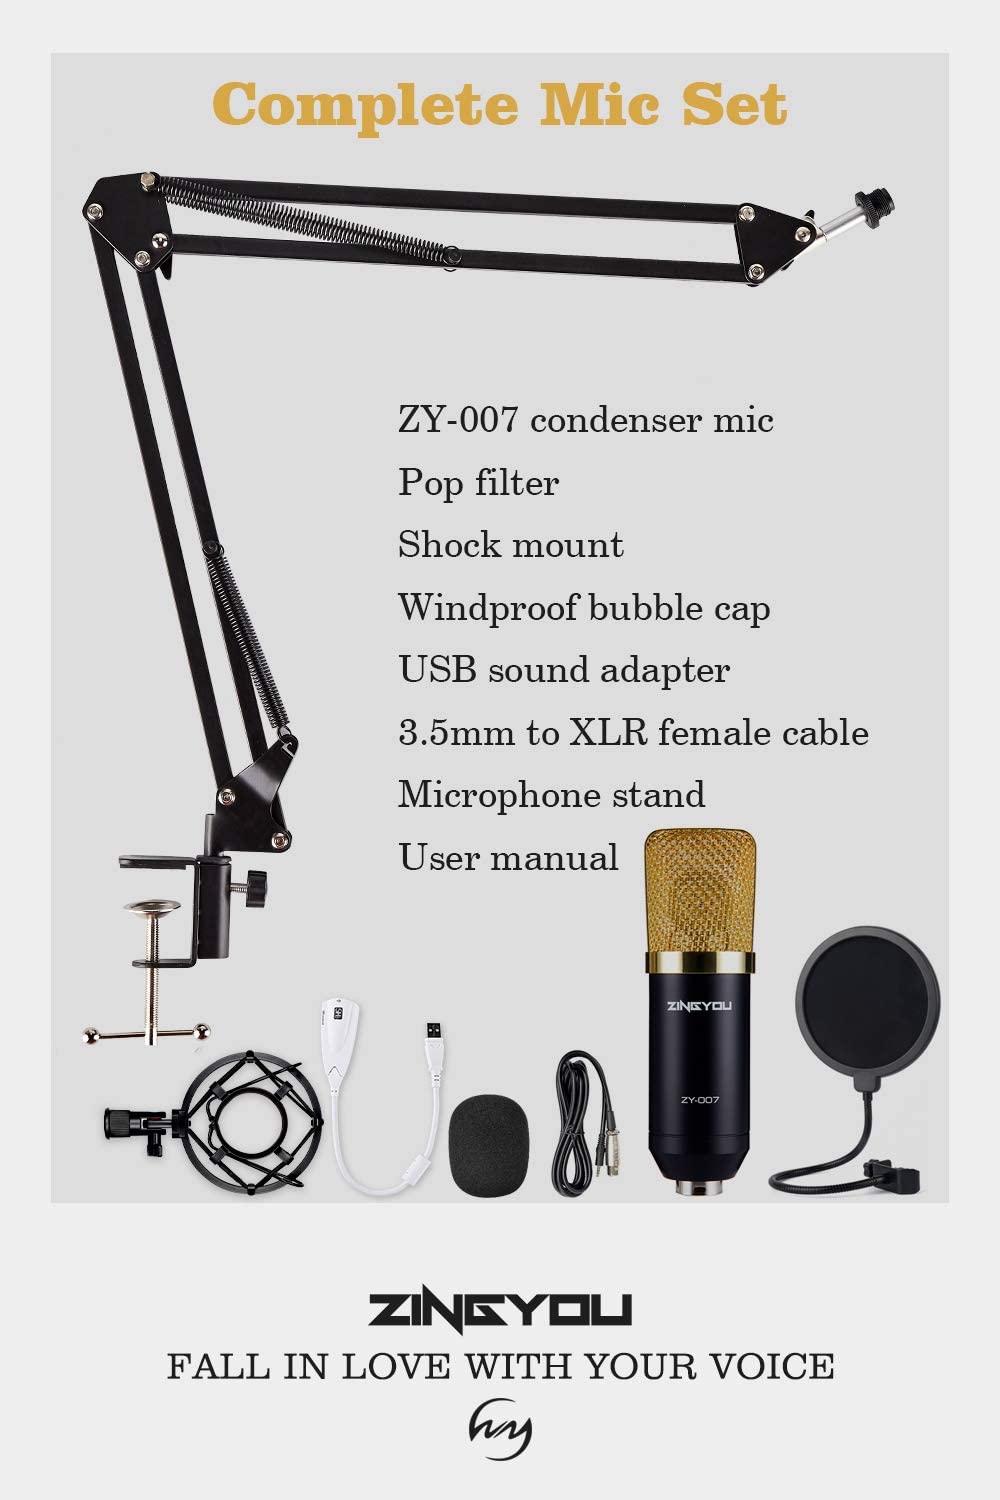 ZY-007 Studio Mic Set for Recording and Podcast with Adjustable Mic Suspension Scissor Arm (LNC)